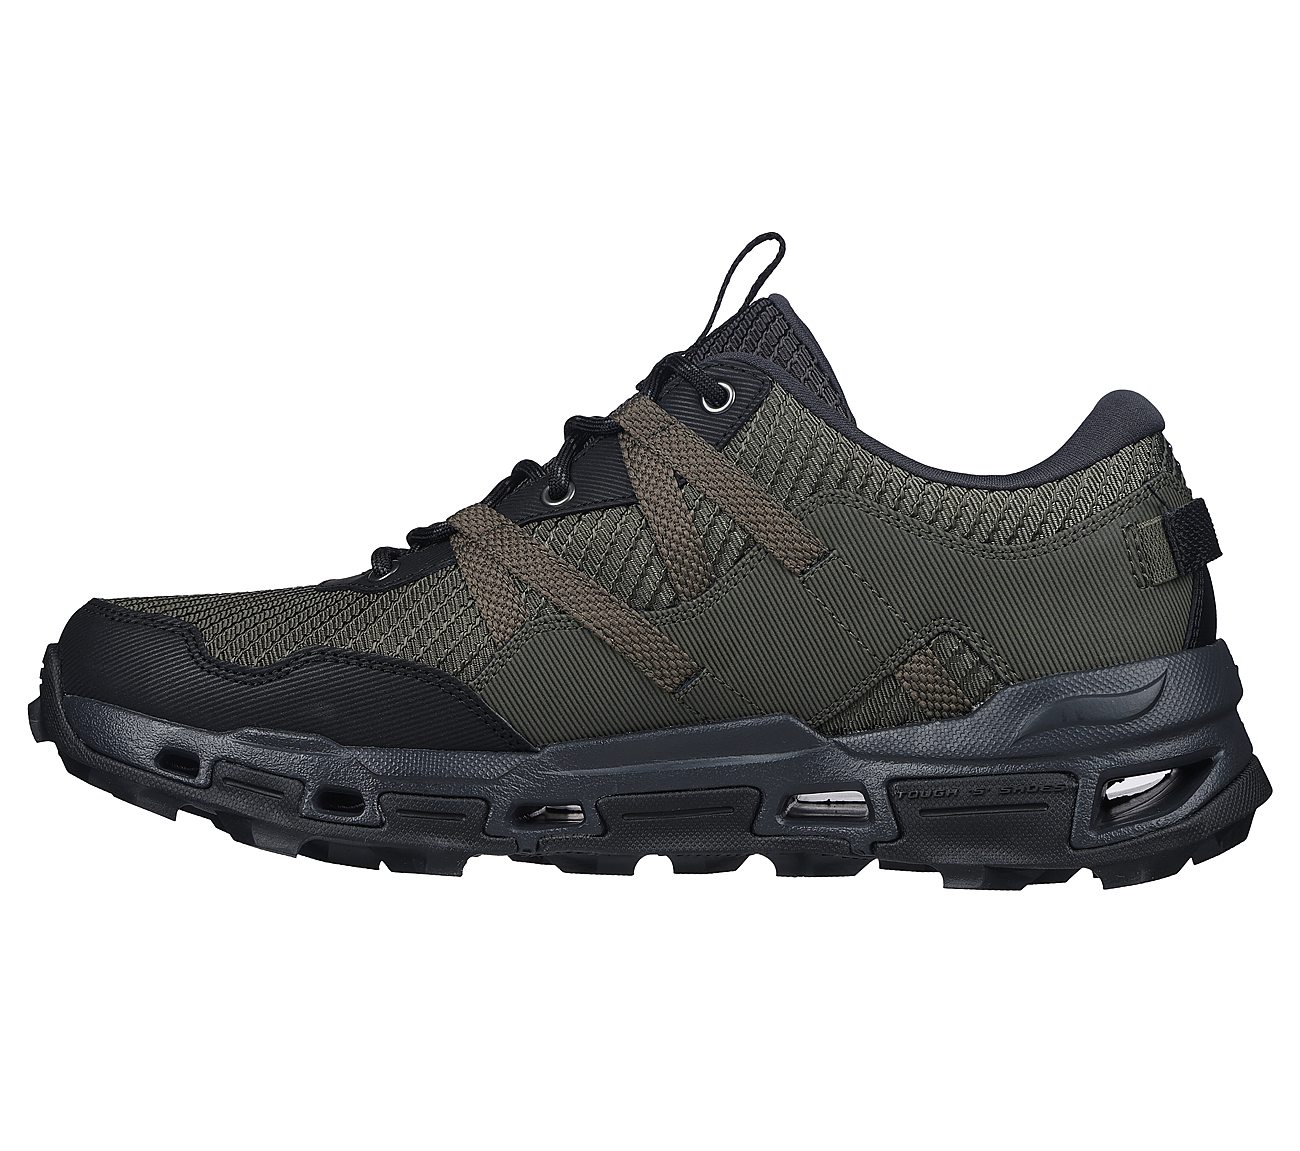 ARCH FIT GLIDE-STEP TRAIL, OLIVE/BLACK Footwear Left View